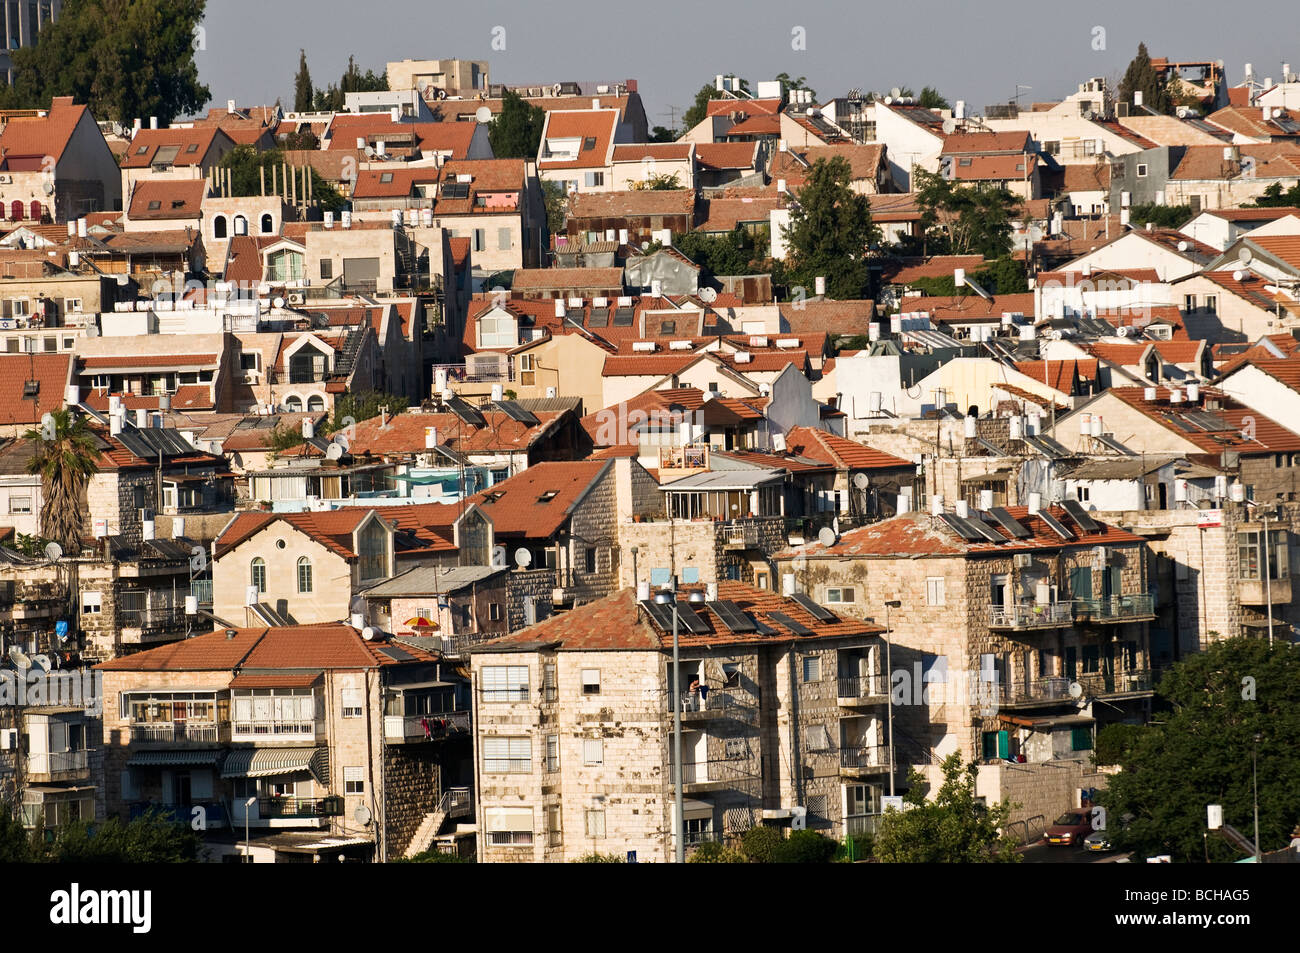 House on house - the cramped living conditions in the Nahlaot quarter of Jerusalem, Israel Stock Photo